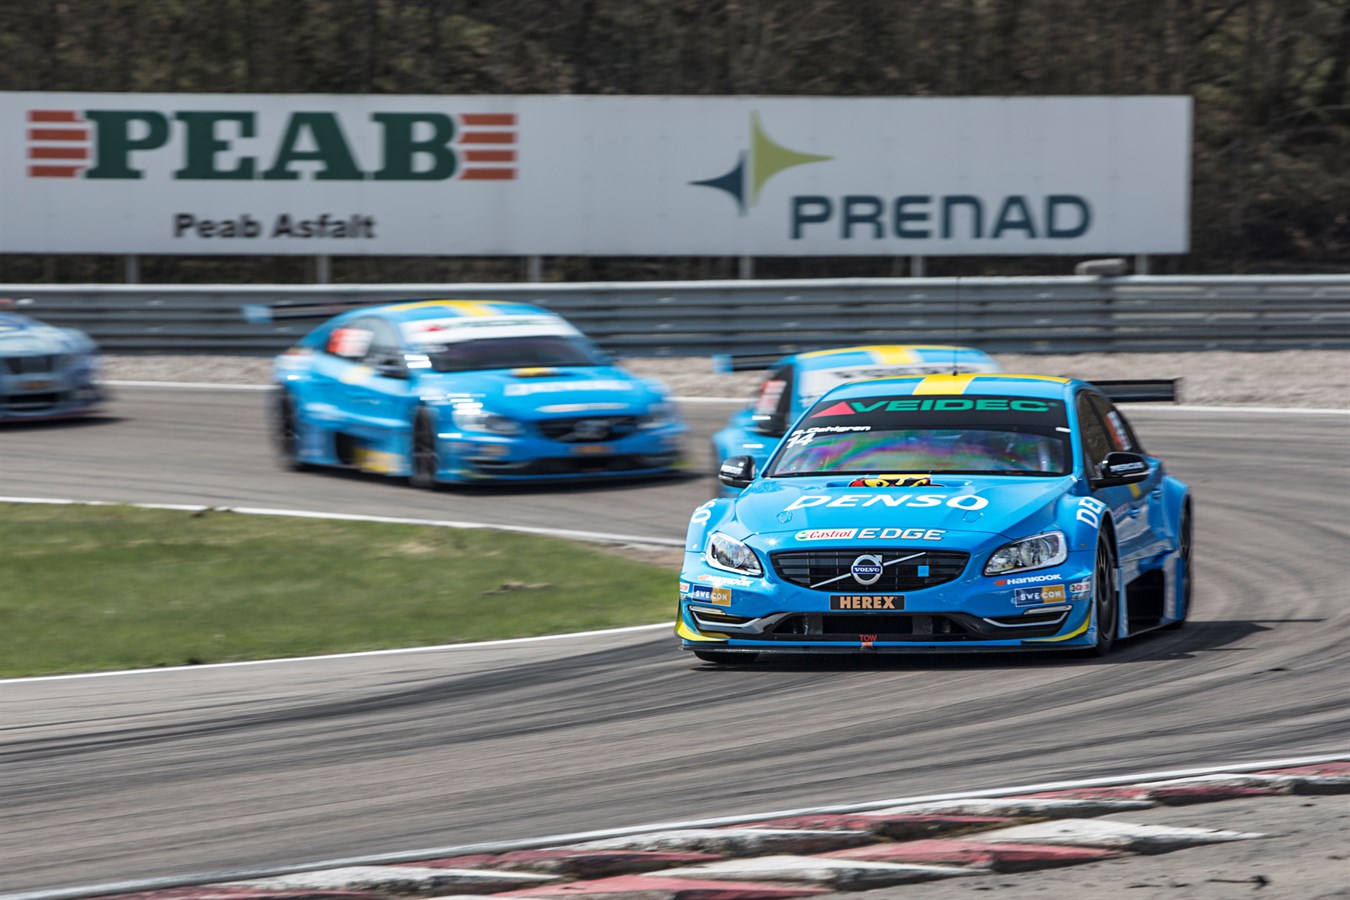 Volvo Polestar Racing at the 2013 STCC premiere at Knutstorp, Sweden